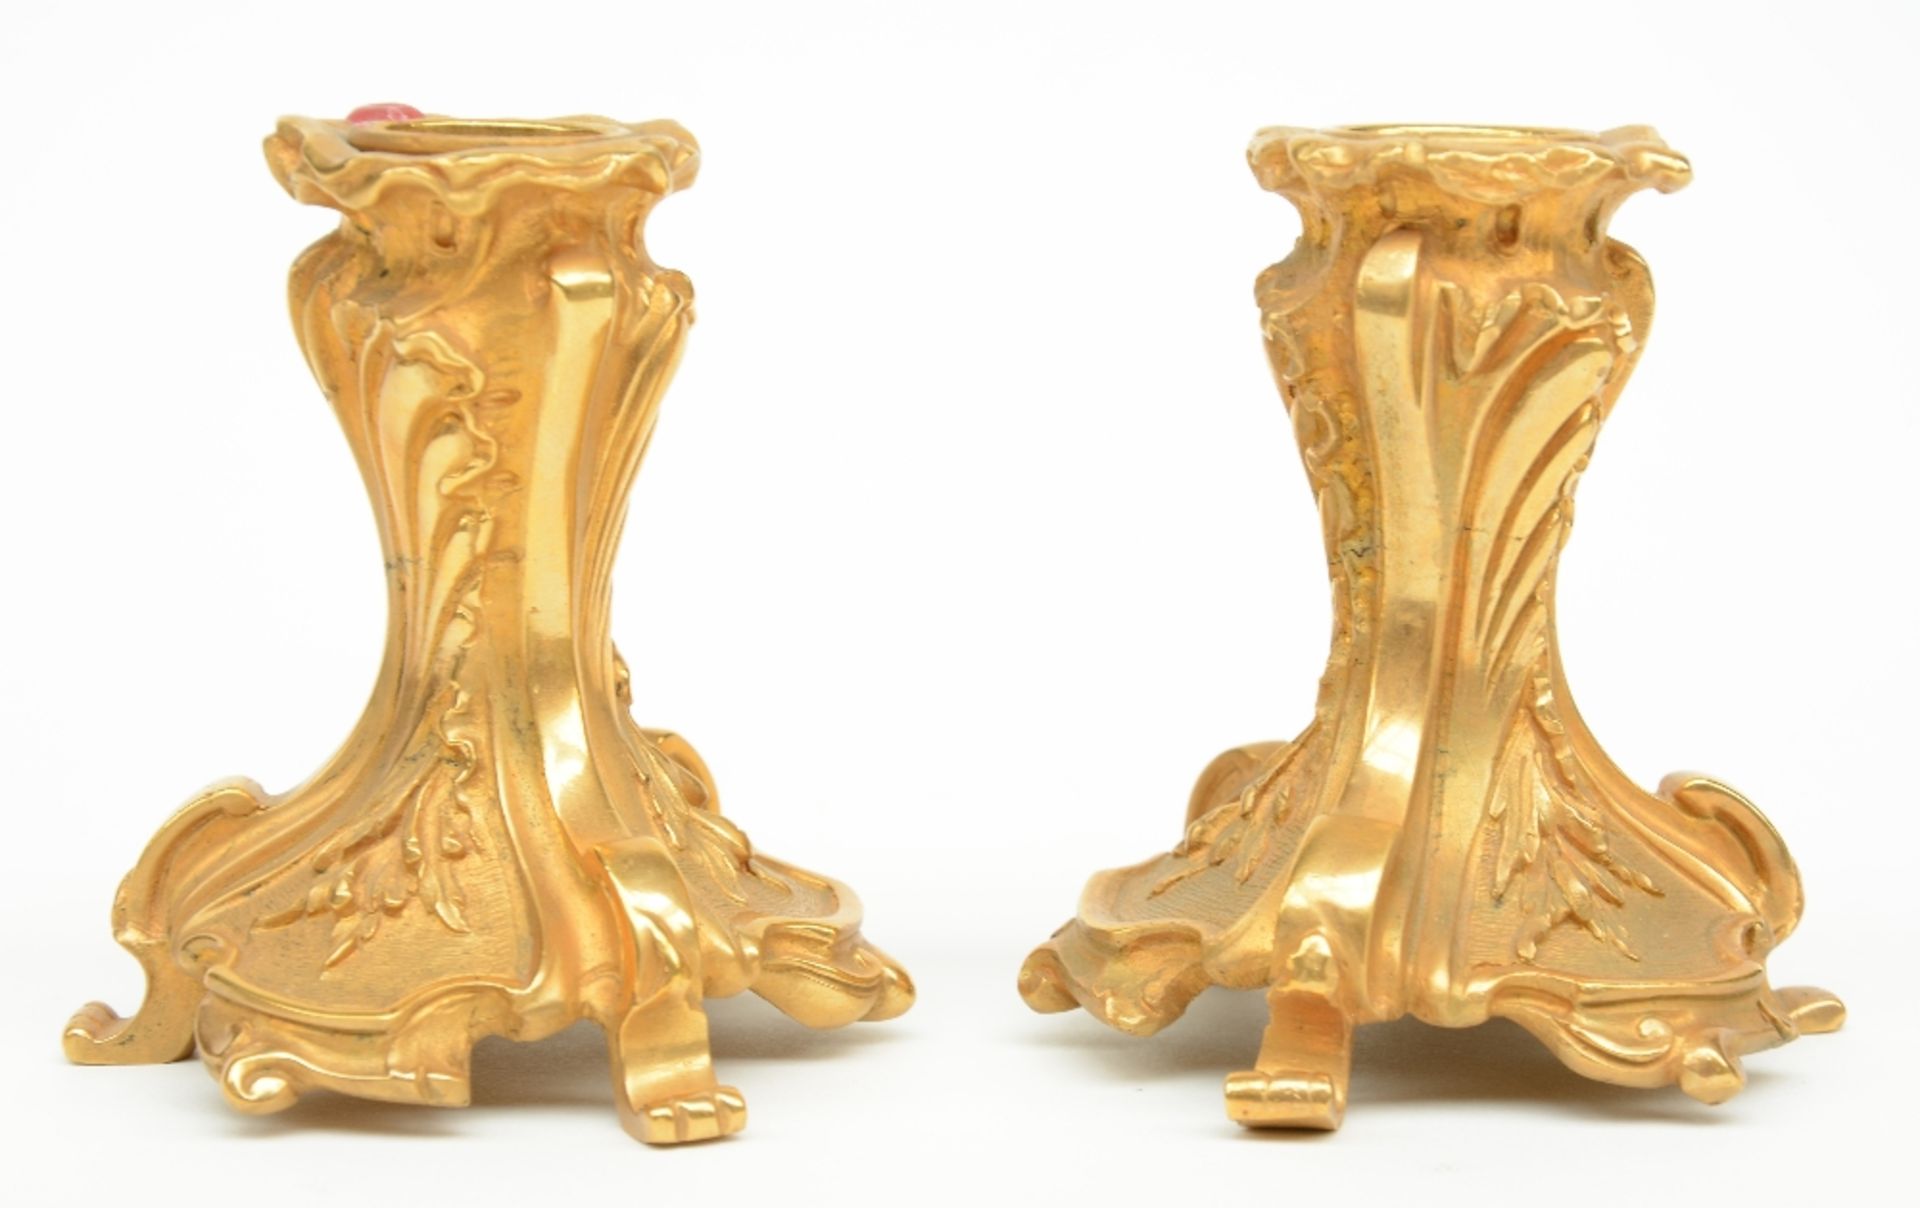 A fine LXV style ormolu bronze ink stand with a ditto pair of candlesticks, 19thC, H 9 - B 19 - D - Bild 6 aus 8